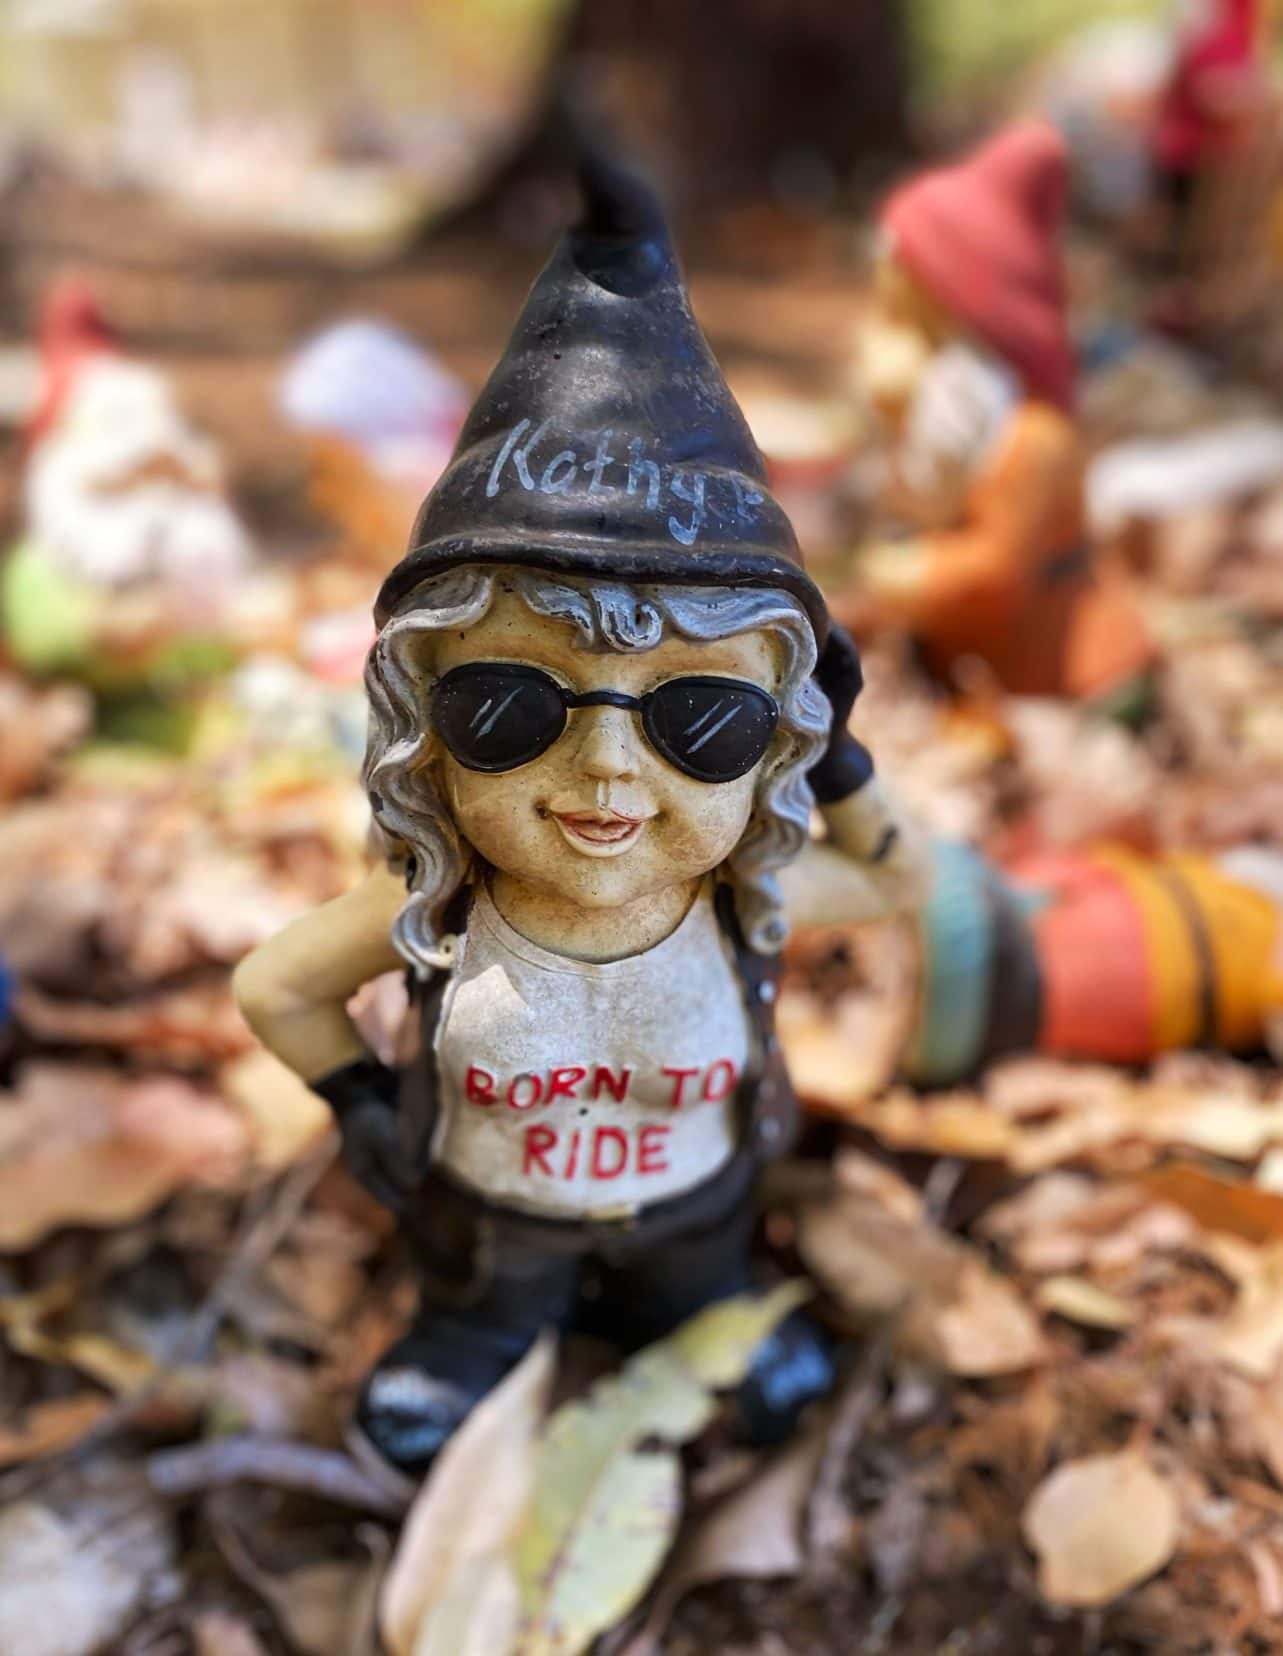 Gnome with "born to ride' on her tee-shirt